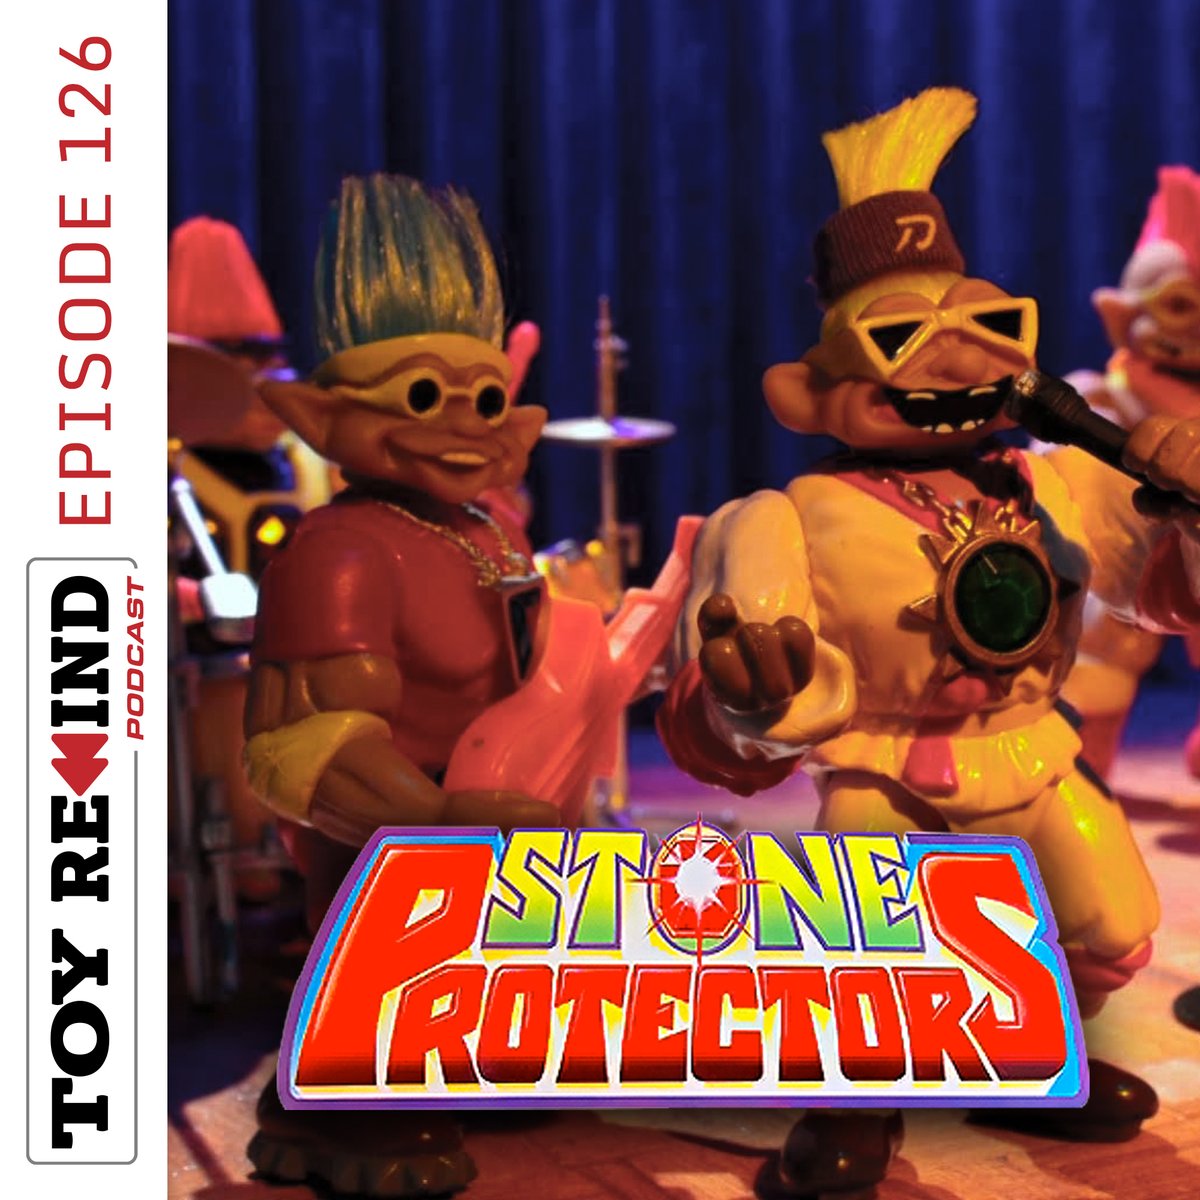 #stoneprotectors #trolls #acenovelty #trollknockoff #actionfigures #toys #90stoys #nerds #toypodcast #podcast #newepisode #collectables #classictoys #podcasts #podcasters #podcastaddict #podcastnerd #nerdpodcast #crossthestreamsmedia